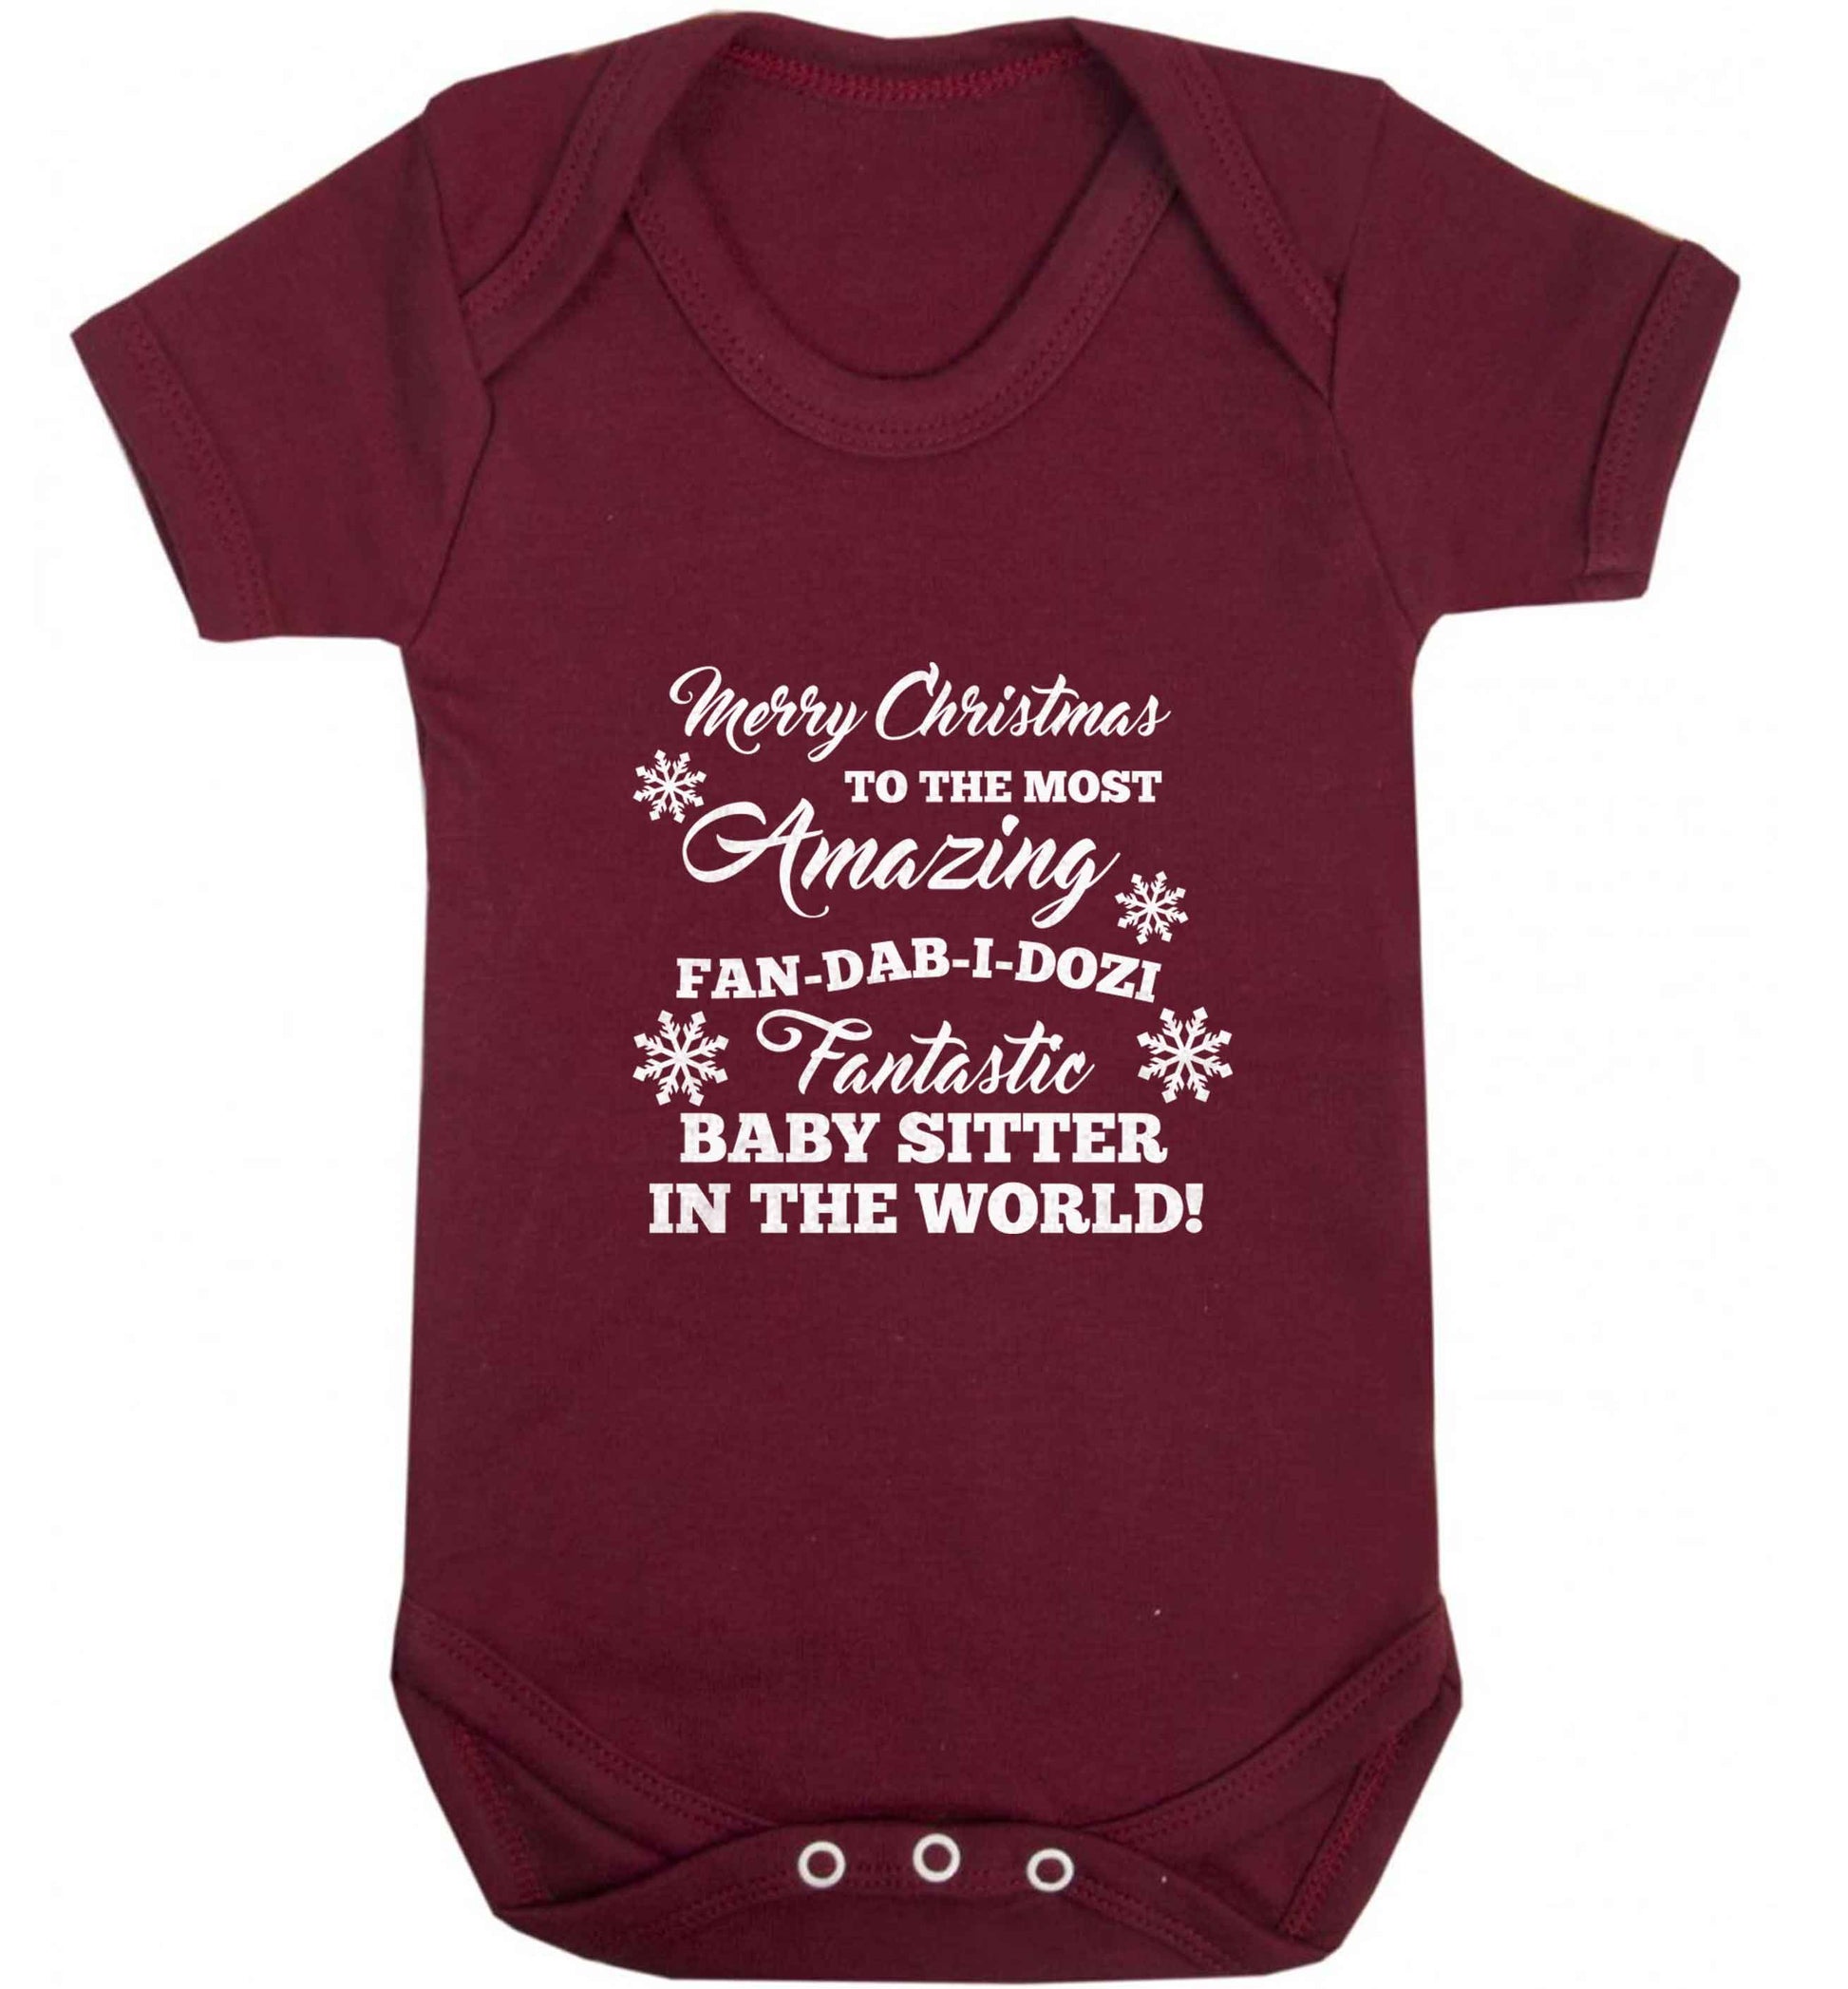 Merry Christmas to the most amazing fan-dab-i-dozi fantasic baby sitter in the world baby vest maroon 18-24 months